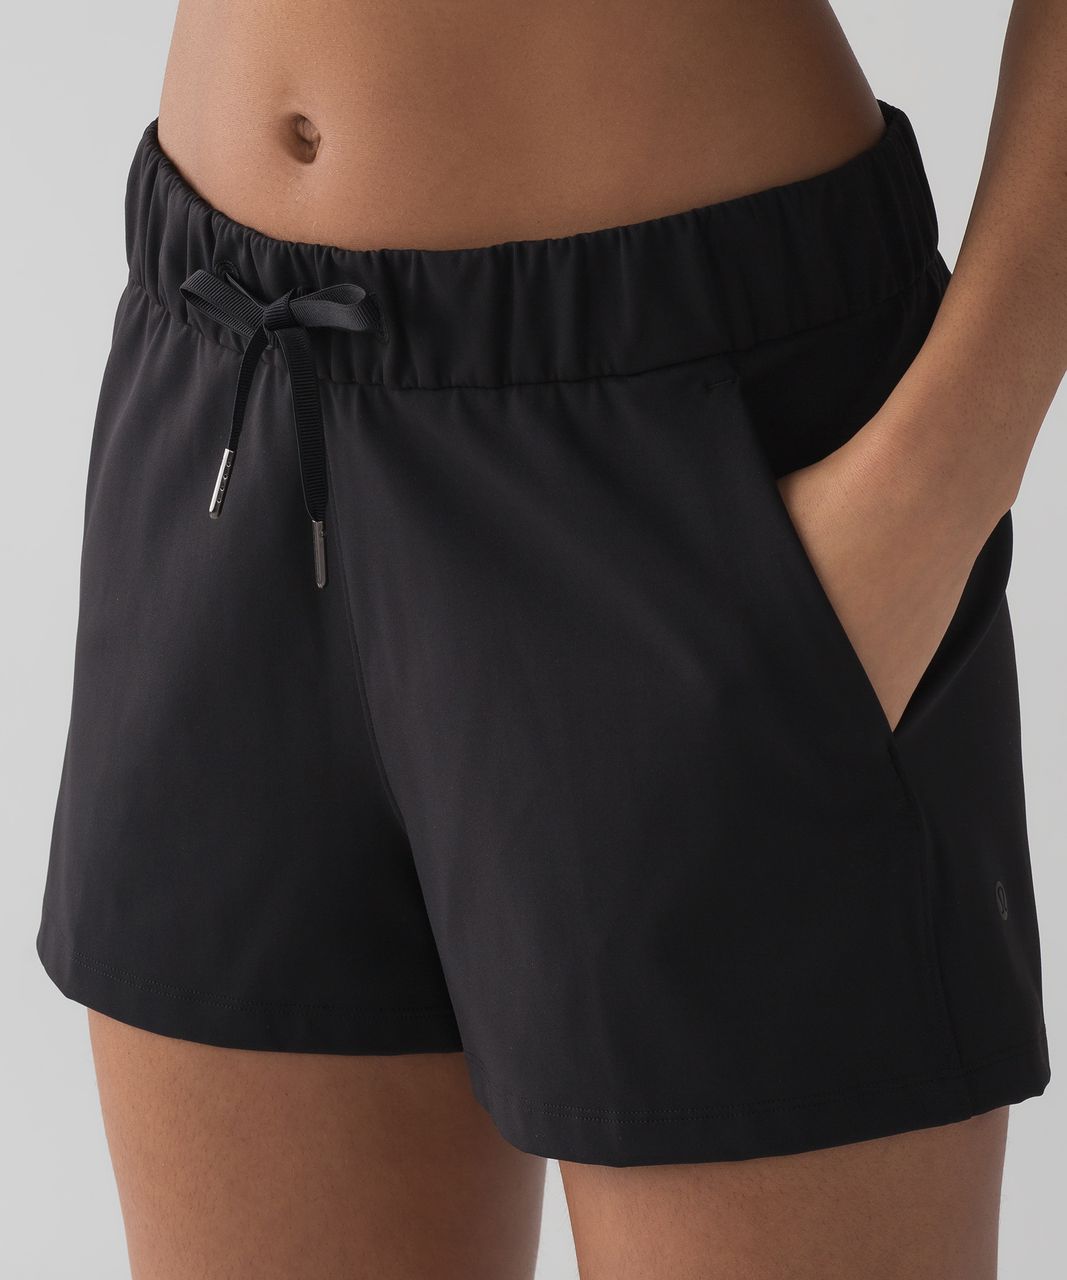 Fit Review Friday! On The Fly Short, On The Fly Crop, On The Fly Pant